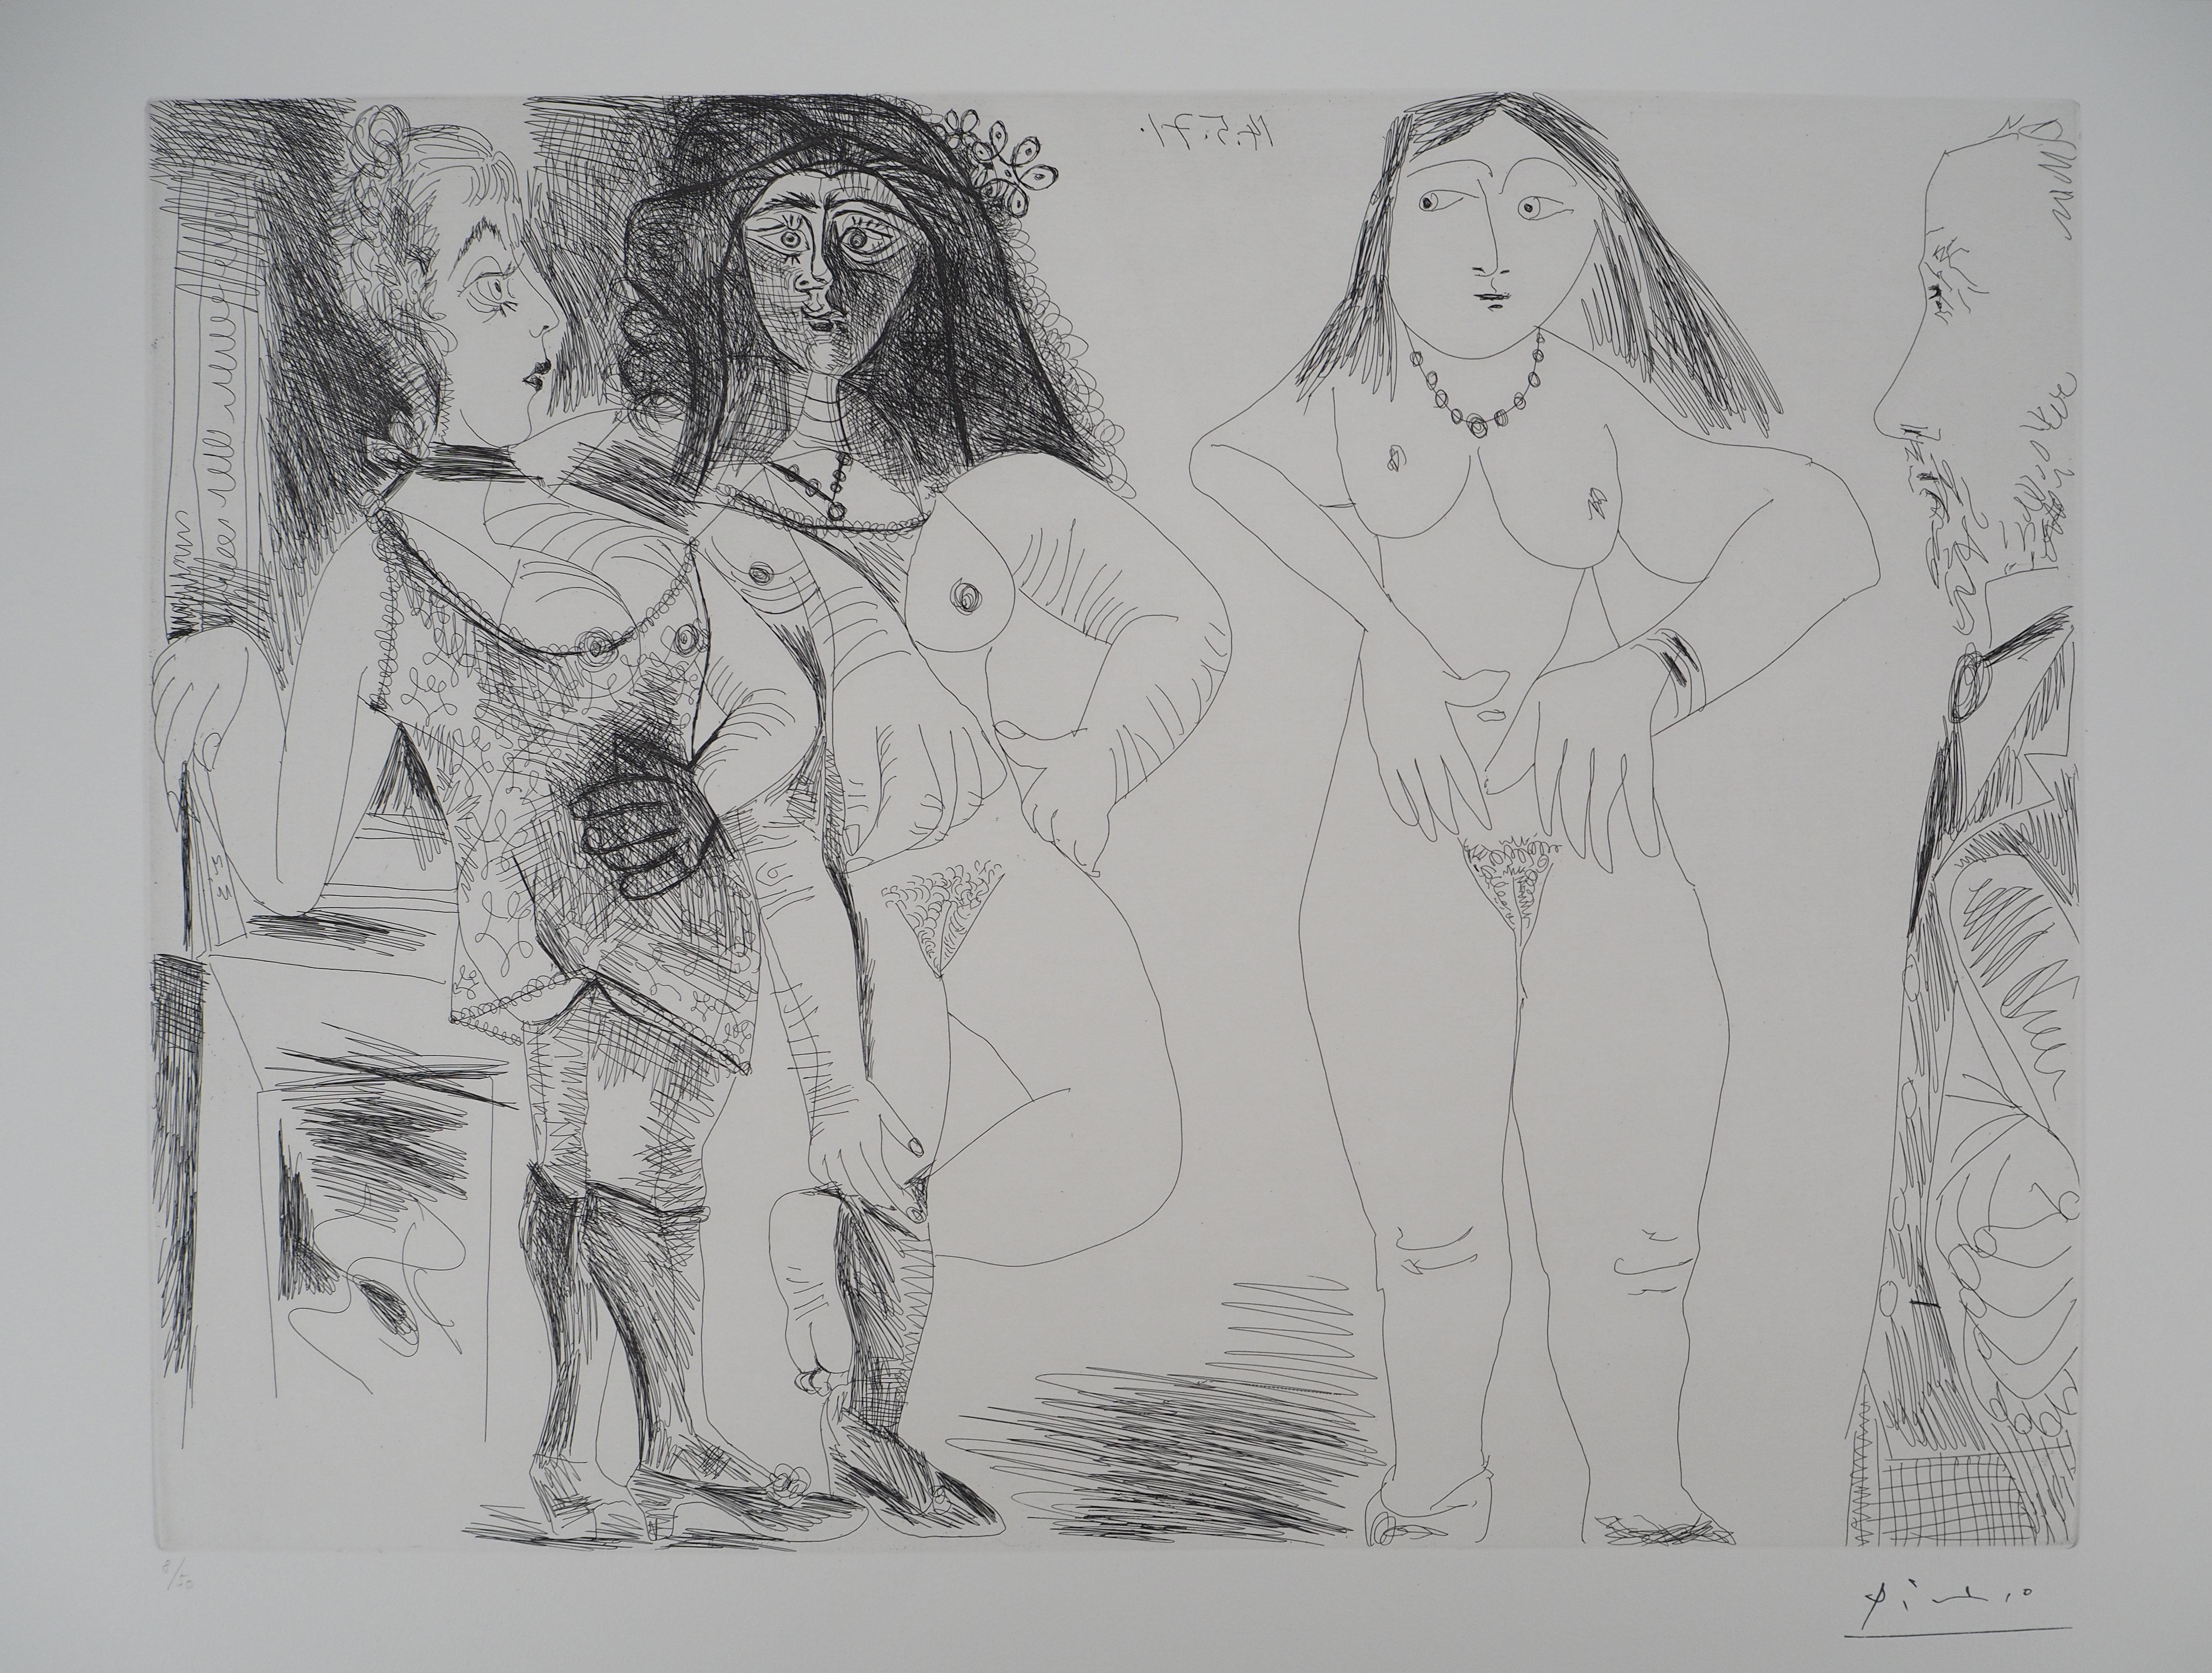 Degas with Three Nude Women - Original etching, Signed (Bloch #1981) - Modern Print by Pablo Picasso